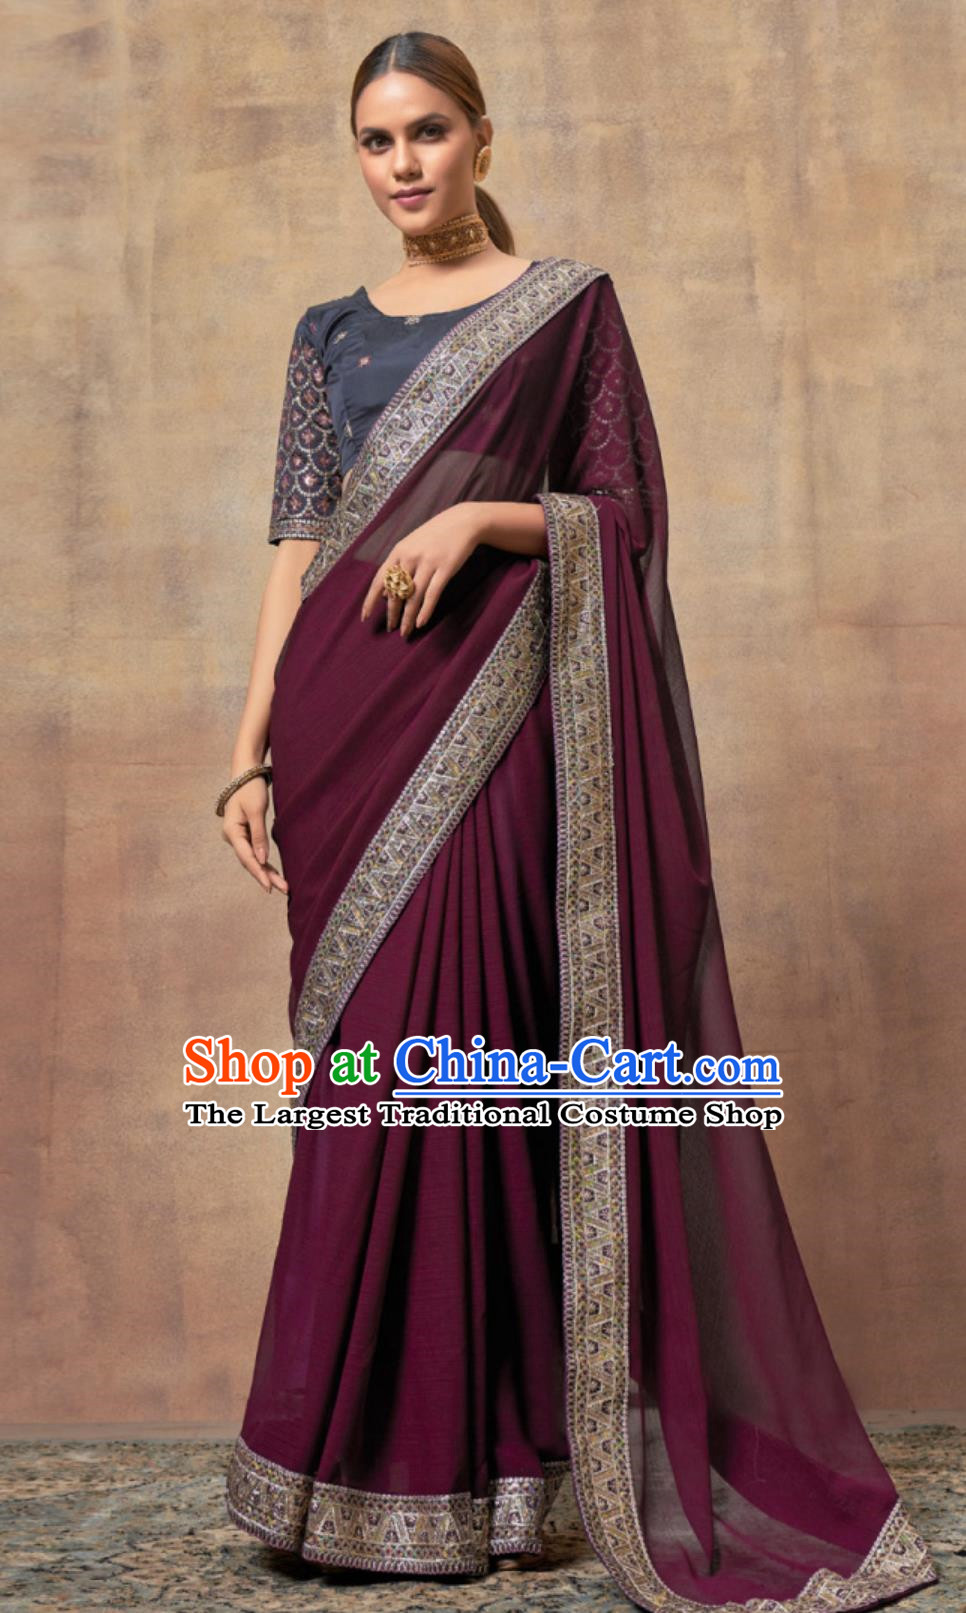 India Deep Purple Slimming Blouse and Wrap Skirt National Clothing Traditional Indian Women Sari